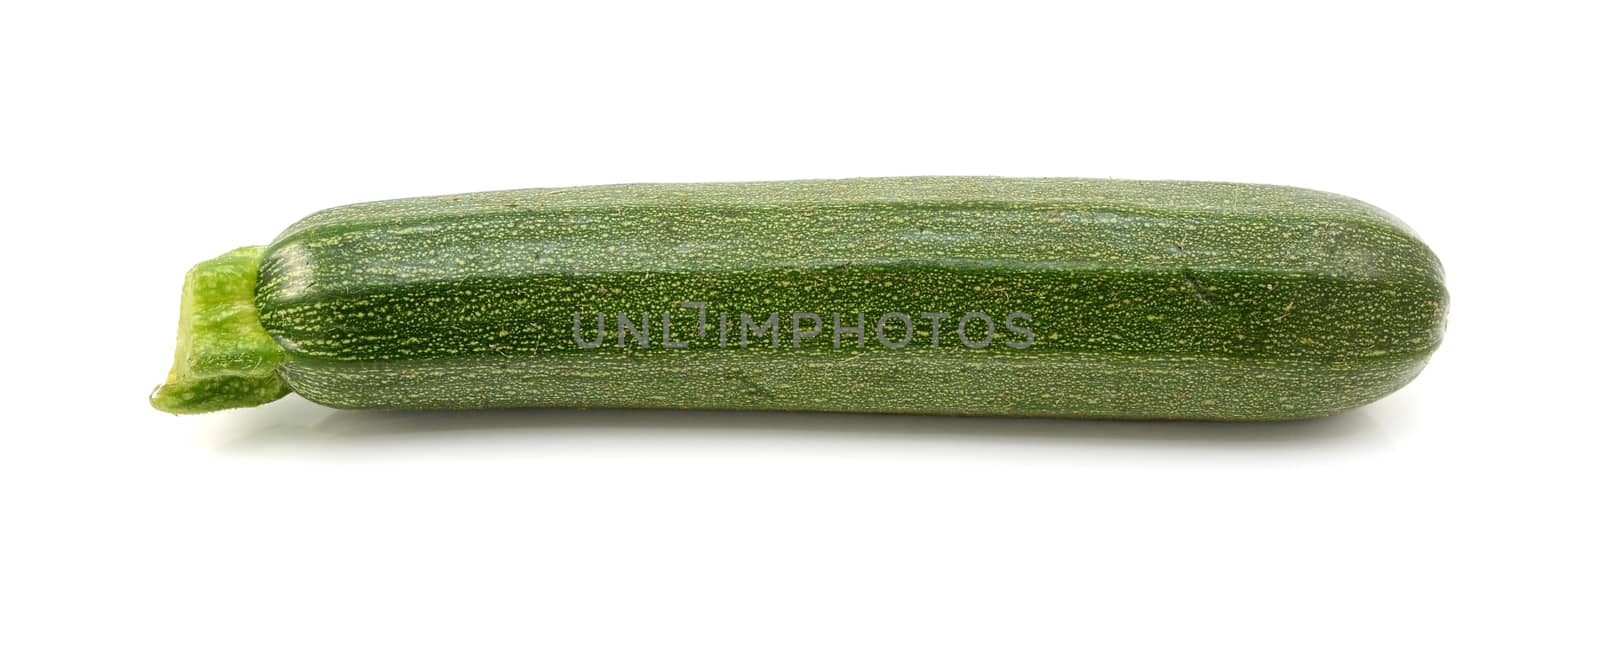 Small green courgette or zucchini by sarahdoow